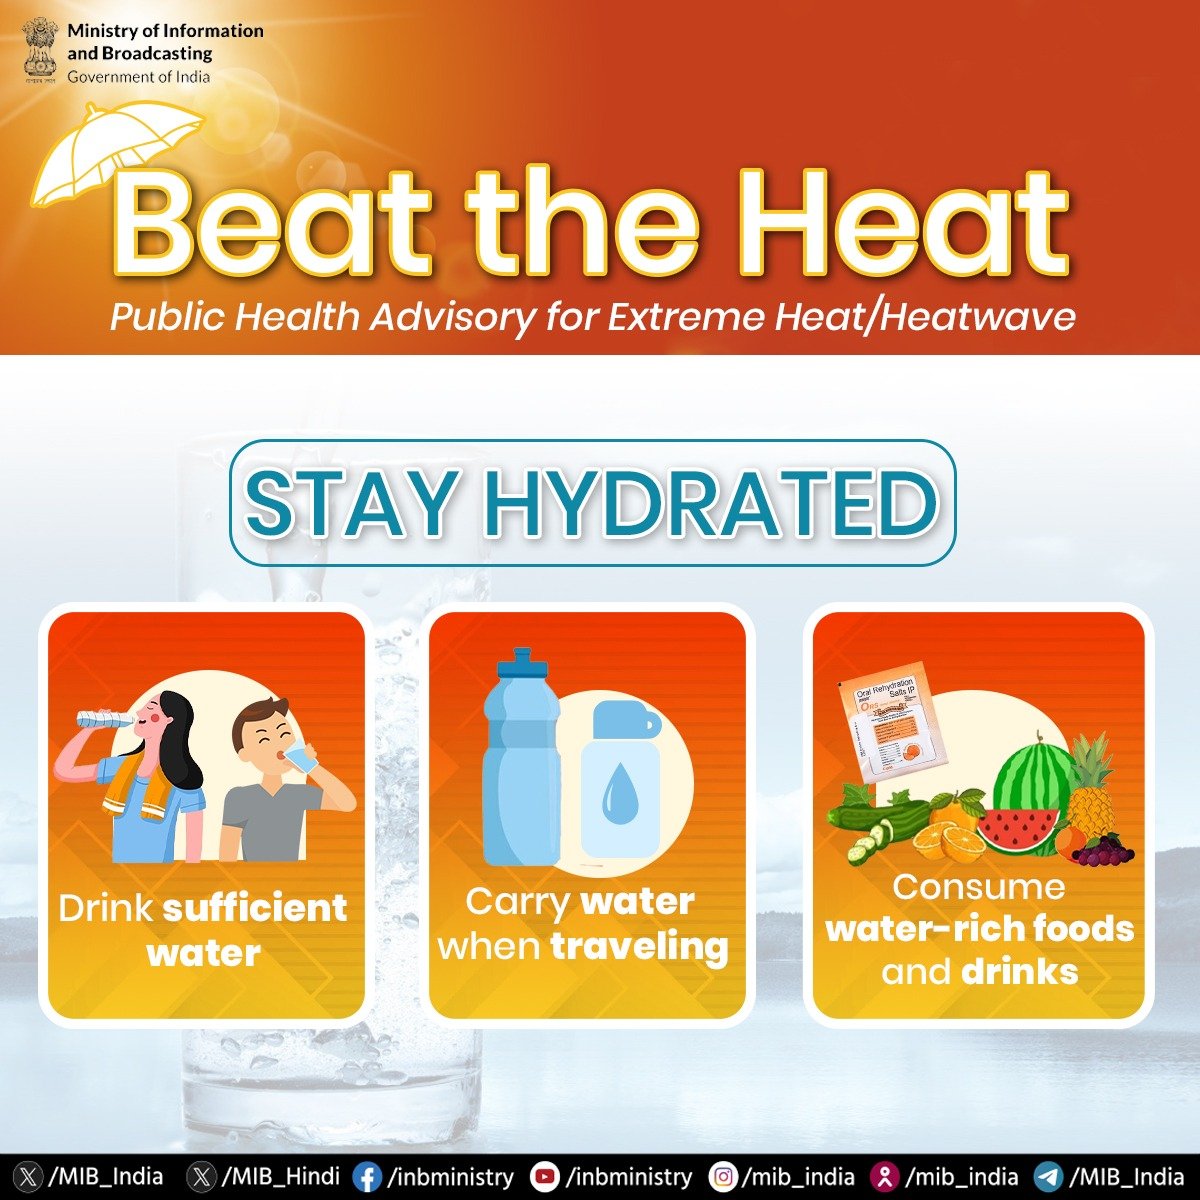 #HeatWave: Beat the Heat! 📝Public Health Advisory for Extreme Heat/Heatwave📷 📷Drink sufficient water📷 📷 📷Consume water-rich foods and drinks📷📷 Stay safe & be !  🍉
@IMDWeather
@Indiametdept
@ndmaindia
@PIB_India 
@DDNewslive
@airnewsalerts